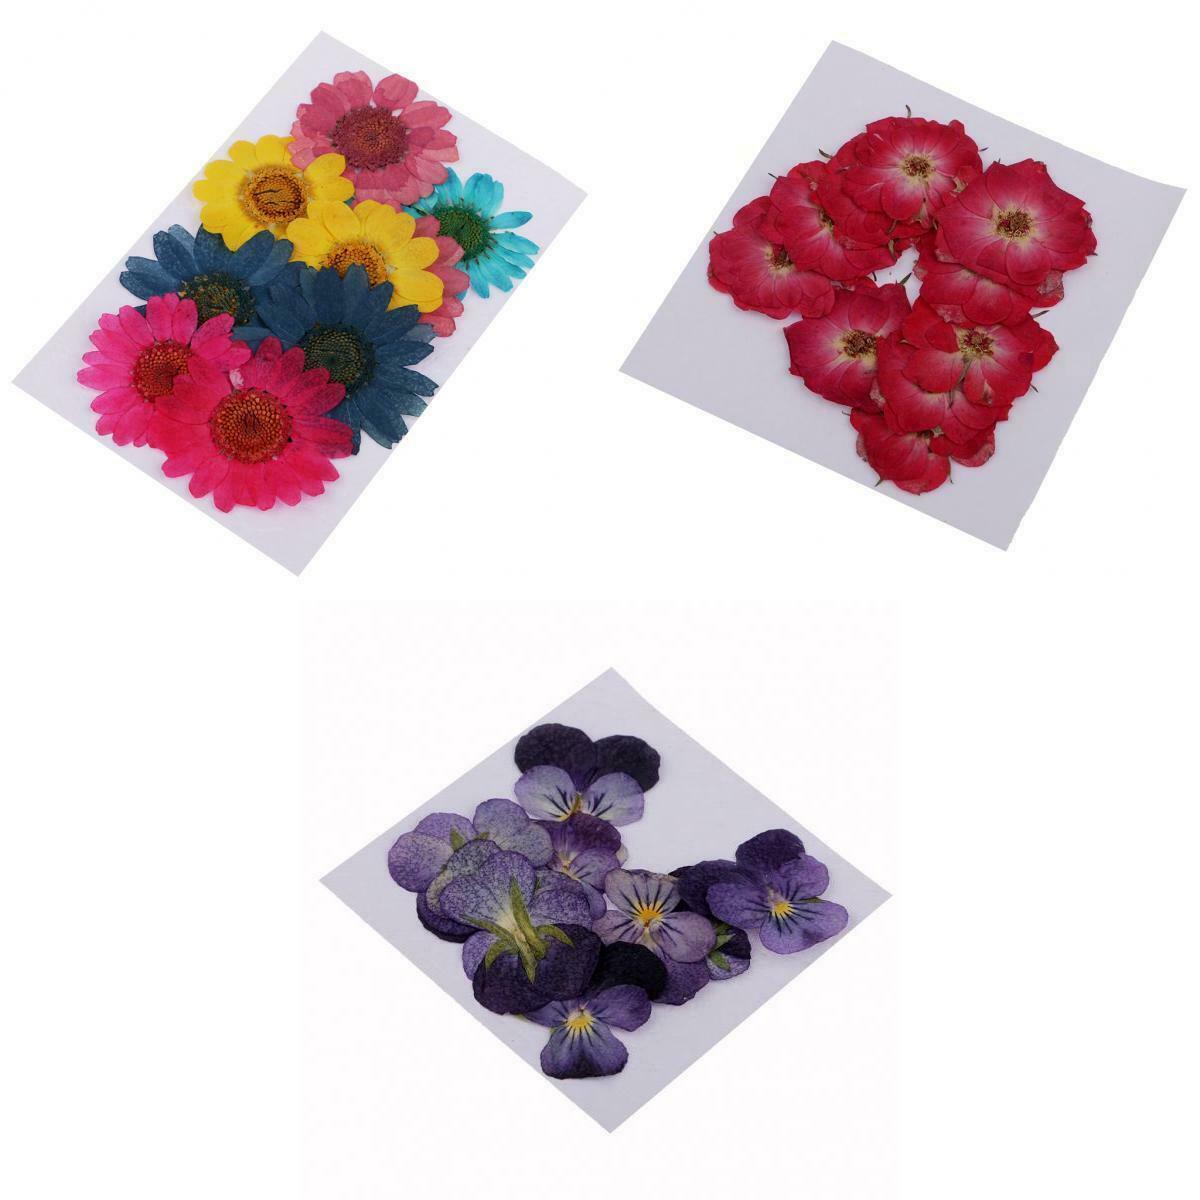 30x Colorful Real Dried Pressed Flowers For Art Craft DIY Scrapbooking